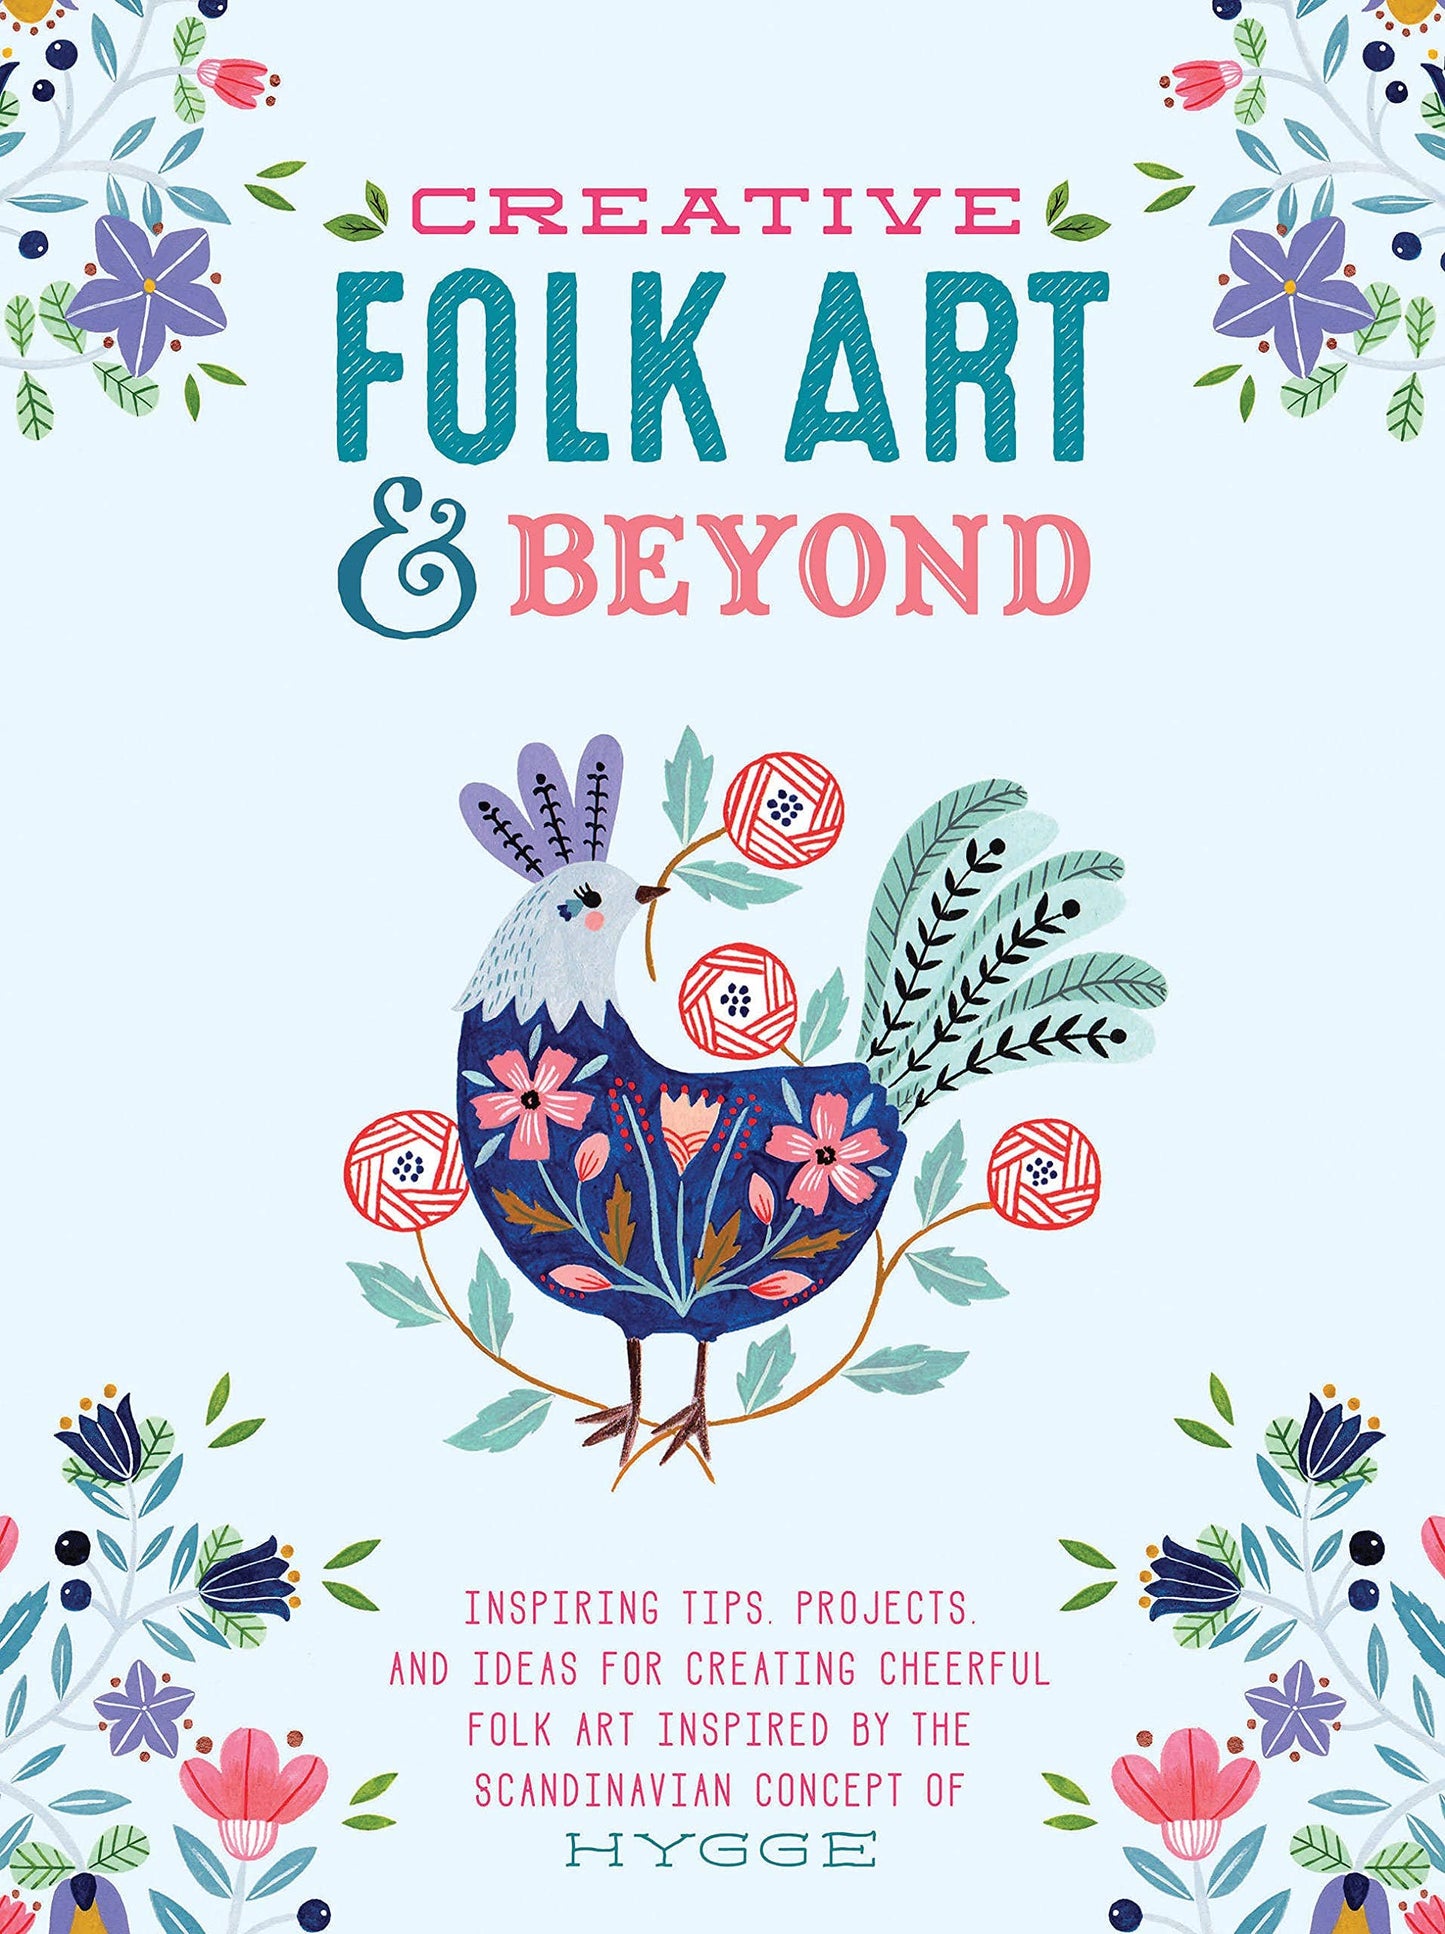 Creative Folk Art and Beyond: Projects Inspired by Hygge